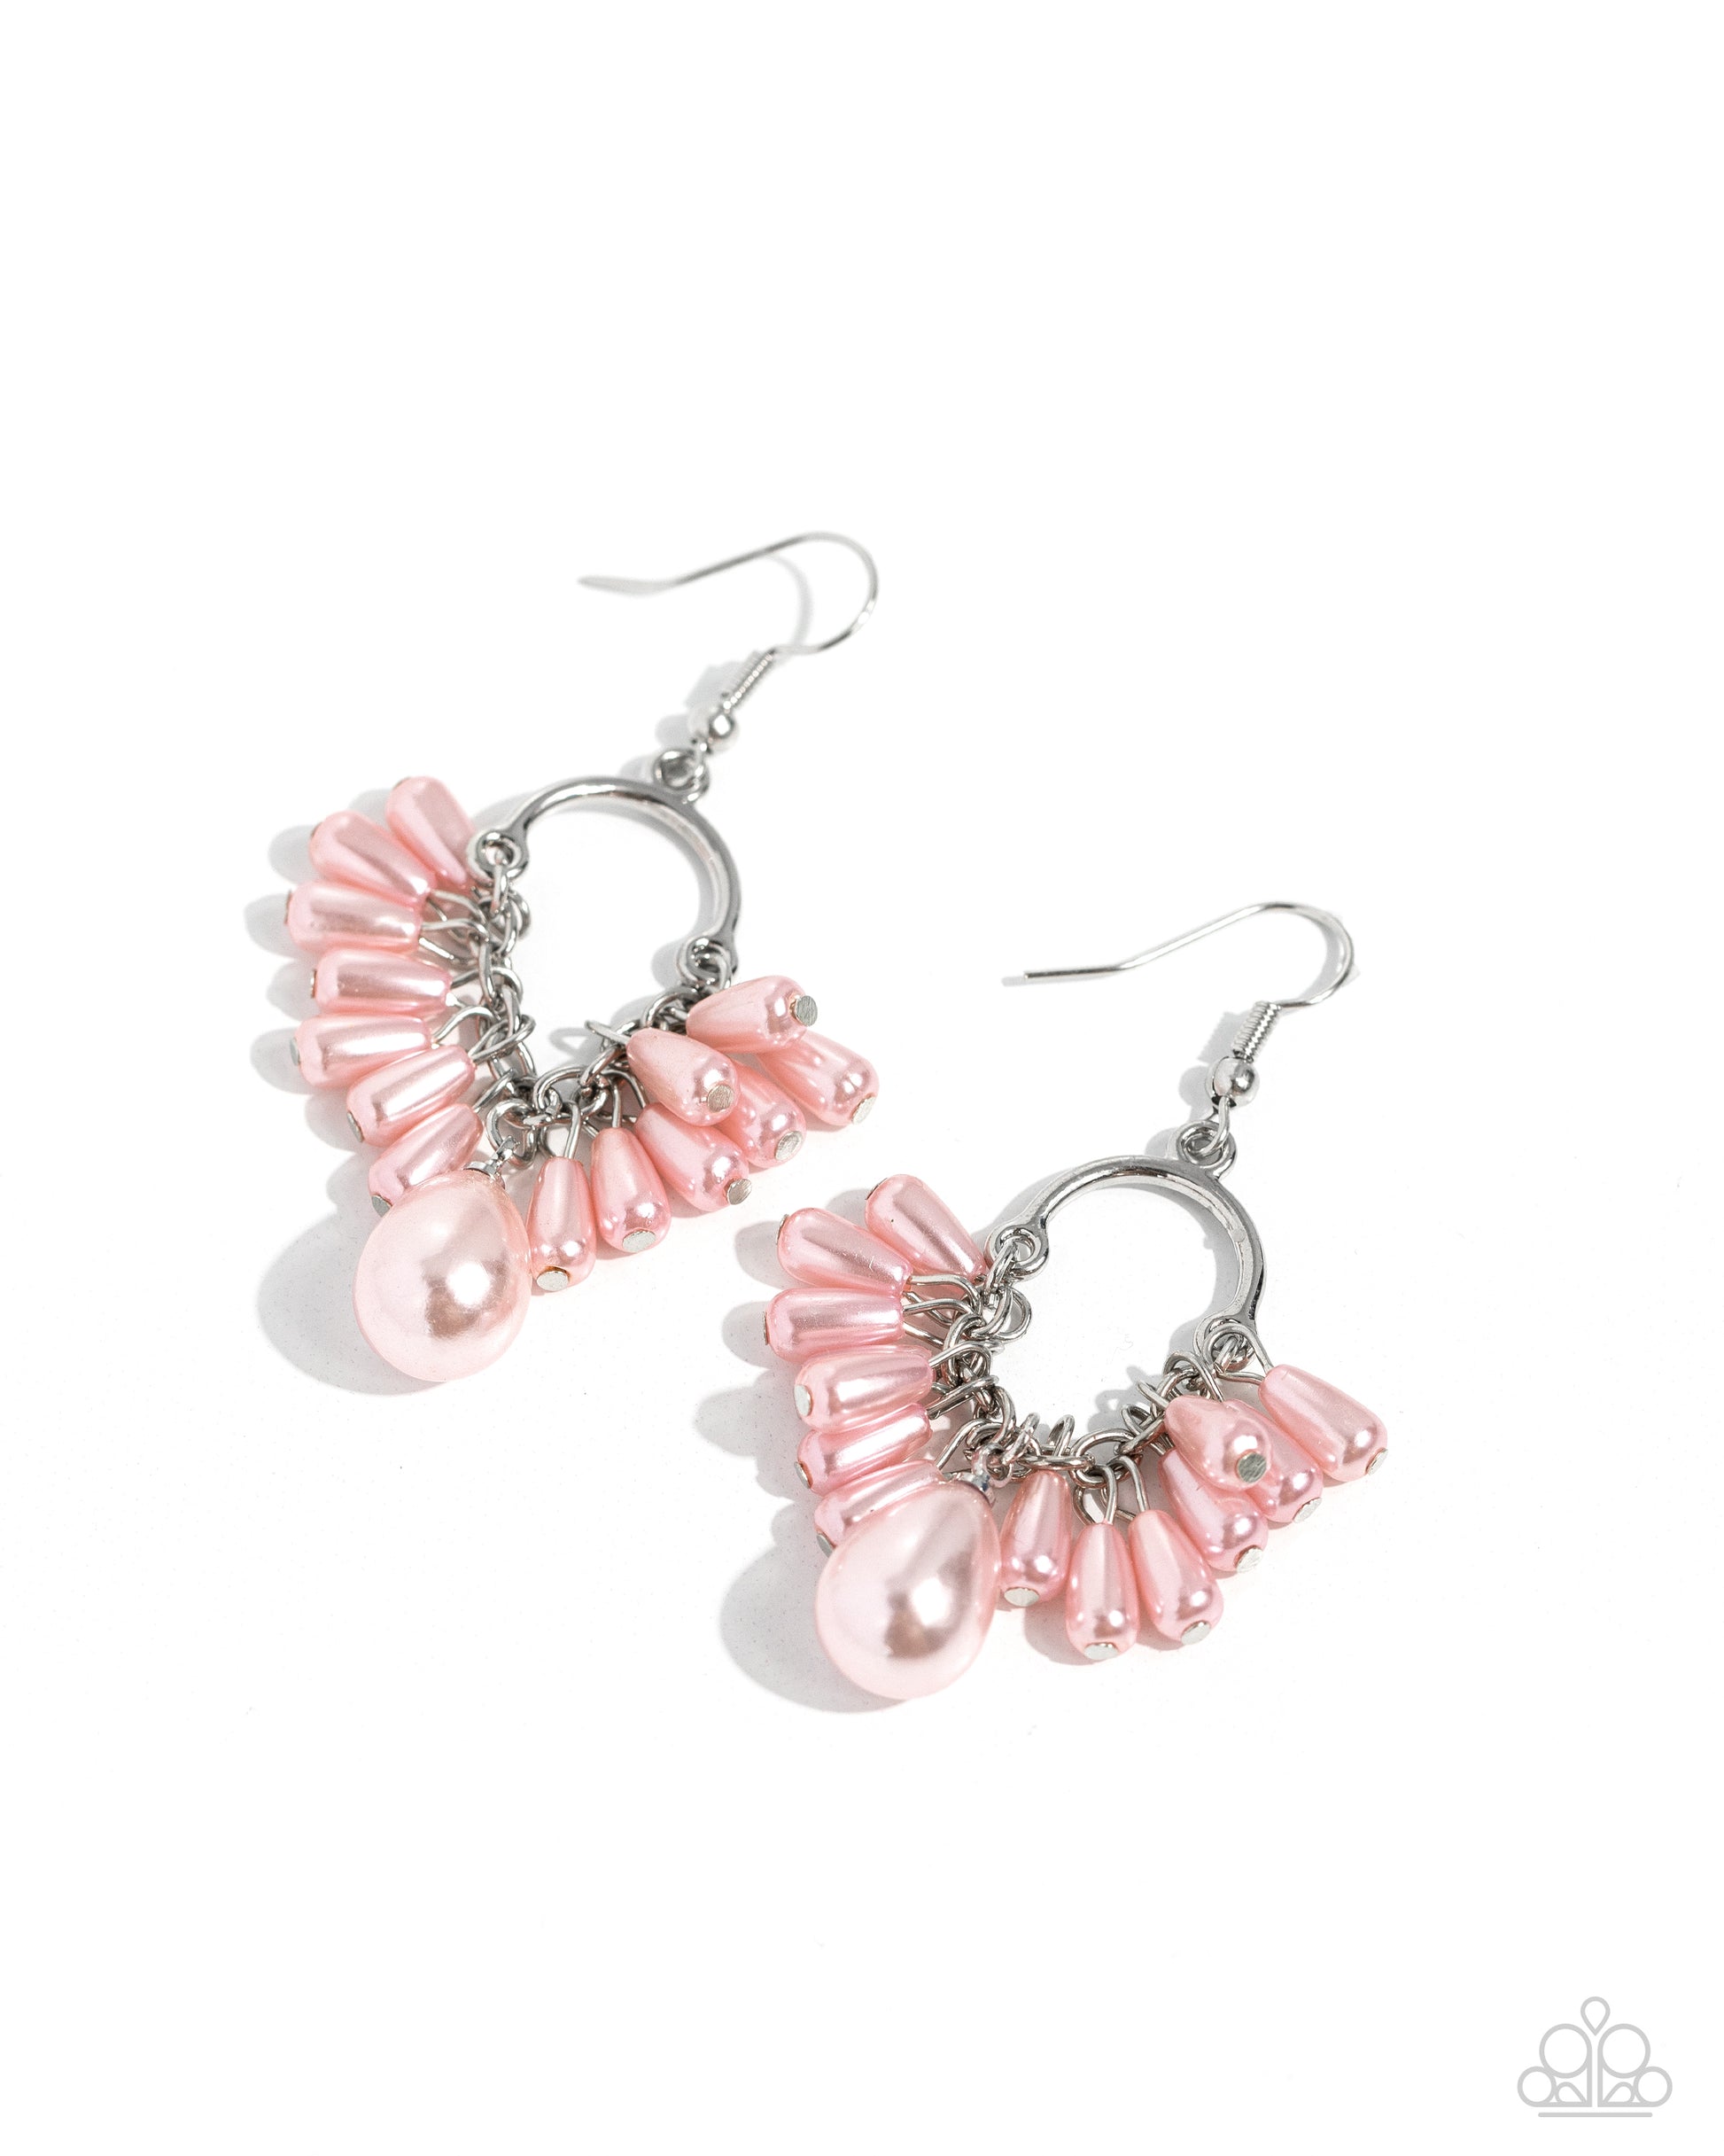 Ahoy There! - pink - Paparazzi earrings